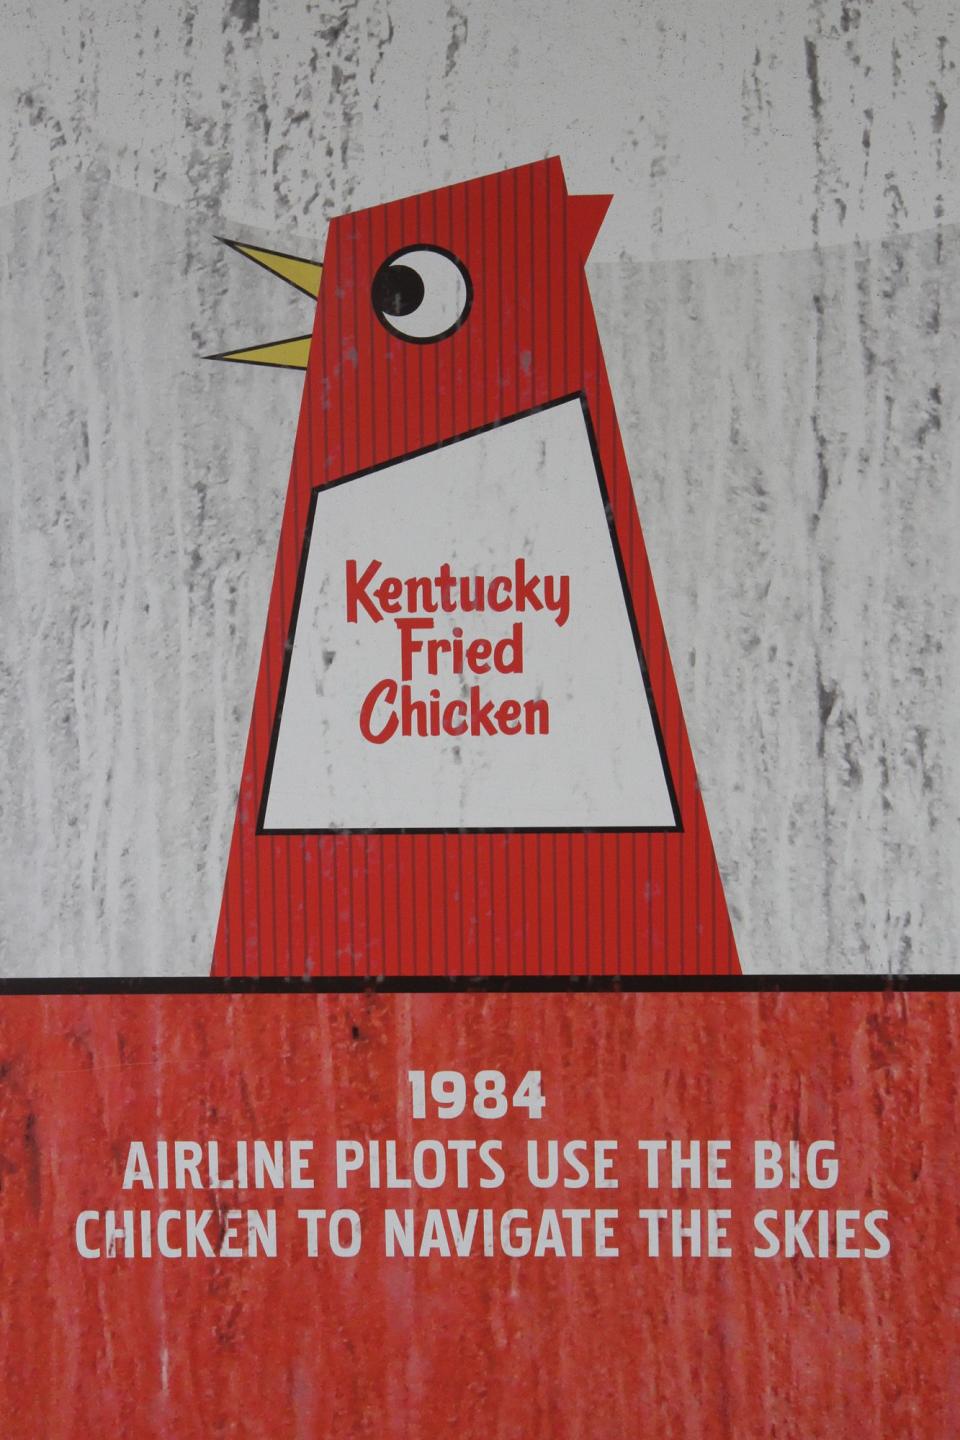 By the time 1984 arrived, airline pilots used The Big Chicken to navigate the skies.